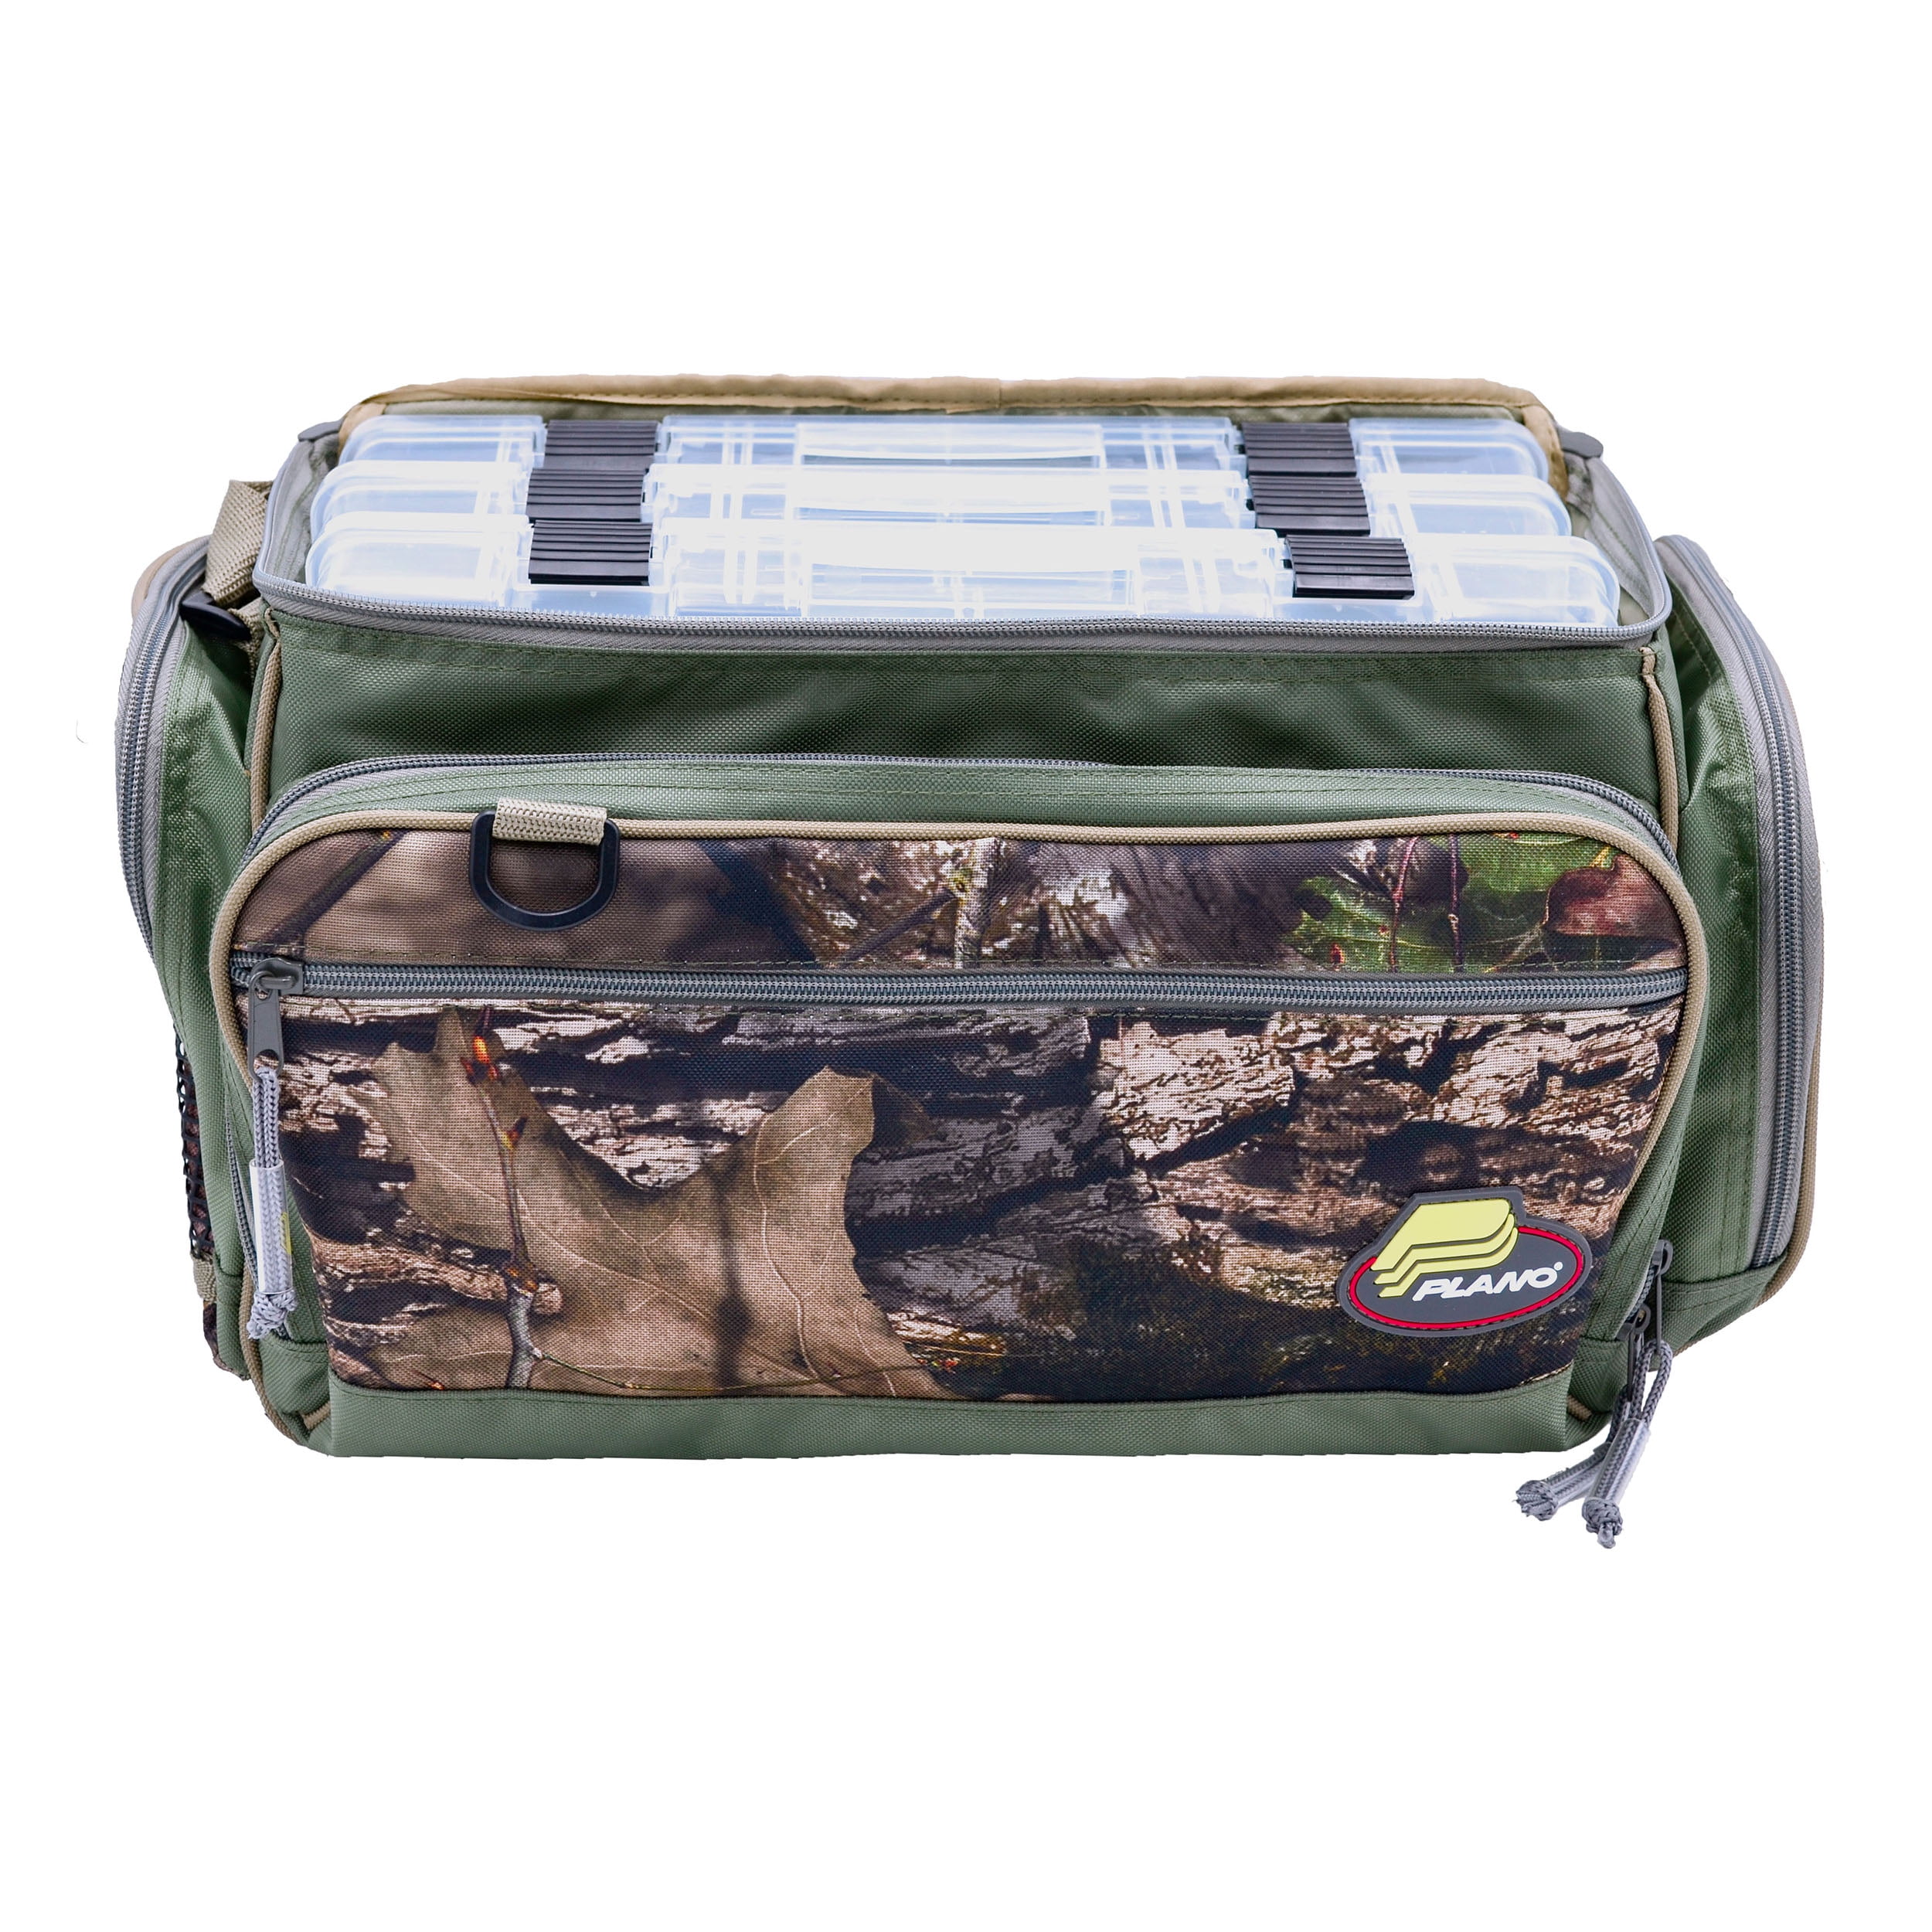 Mossy Oak Storage Crate with Dry Bag, Fishing Accessories Kit and